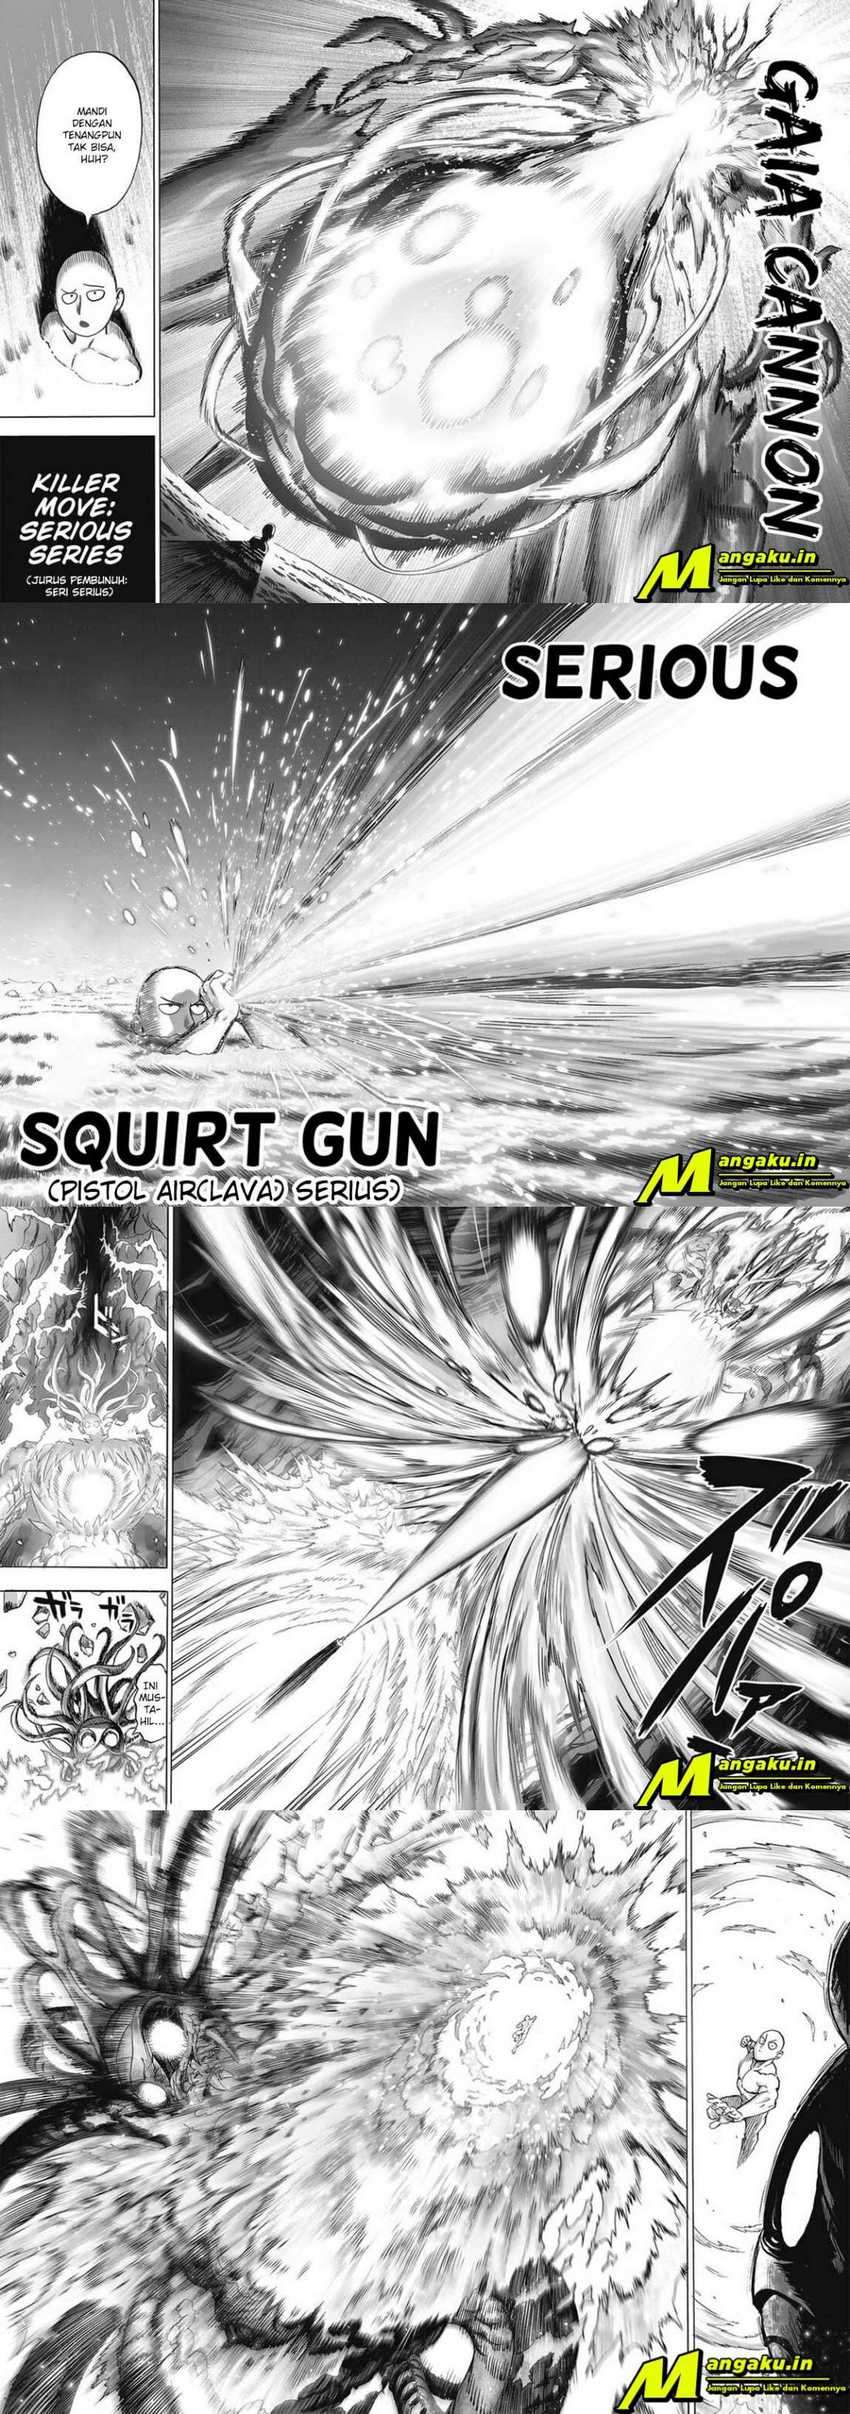 One Punch Man Chapter 199.1